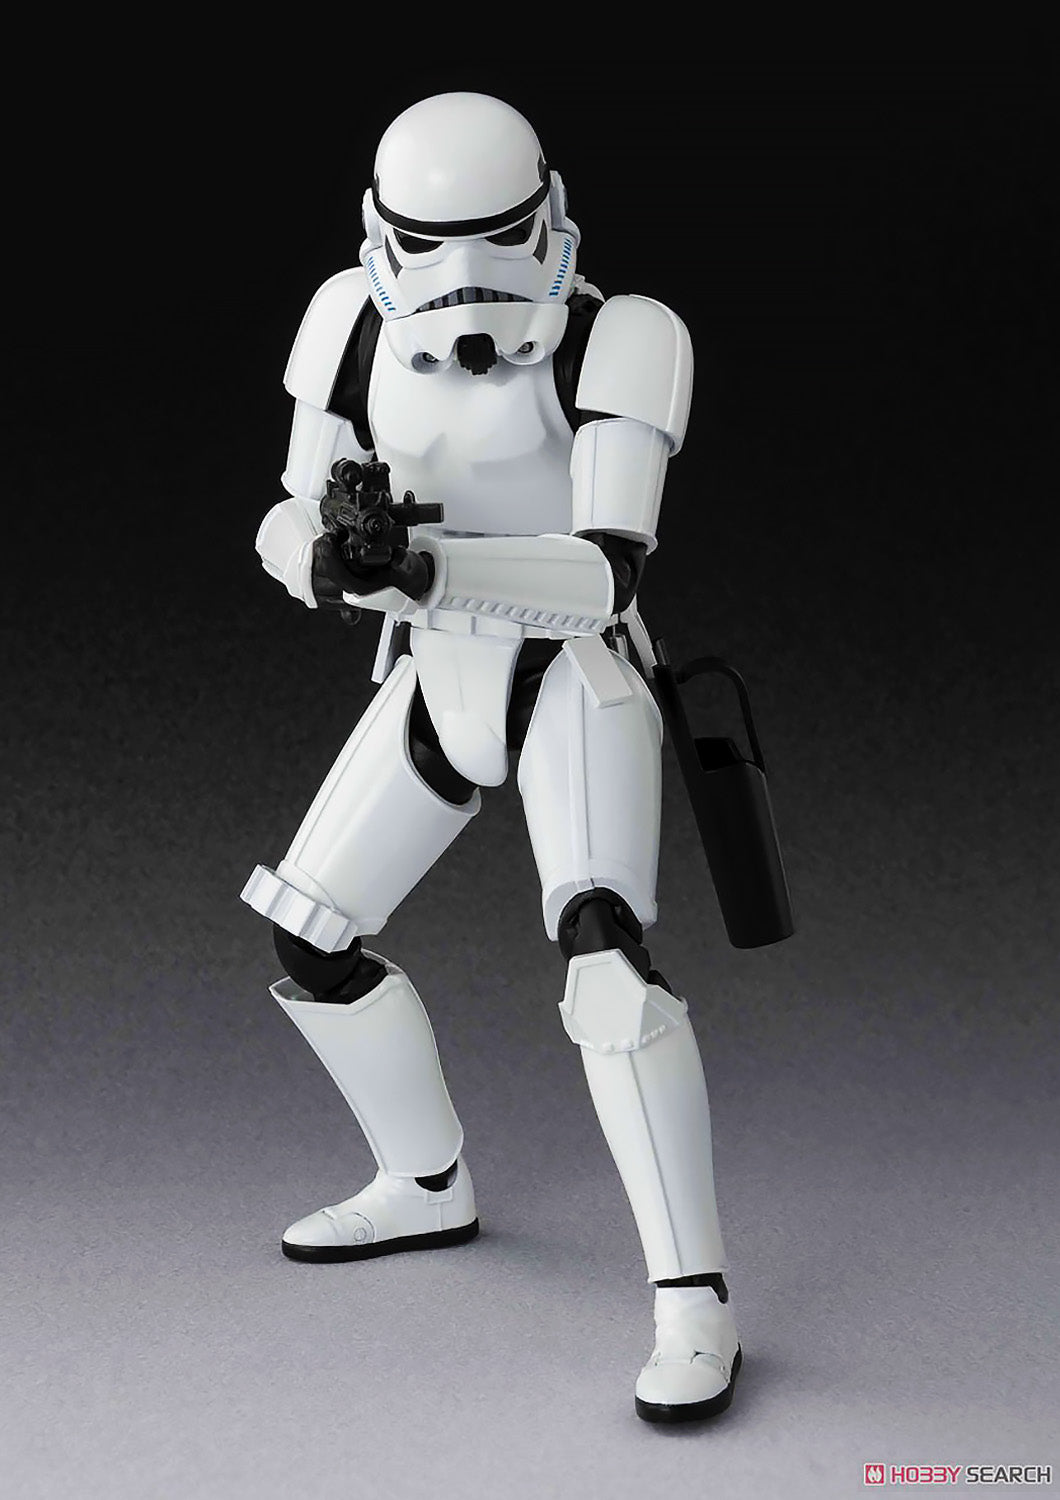 SH FIGUARTS STAR WARS A NEW HOPE IMPERIAL STORM TROOPER - 57467 - Anotoys Collectibles